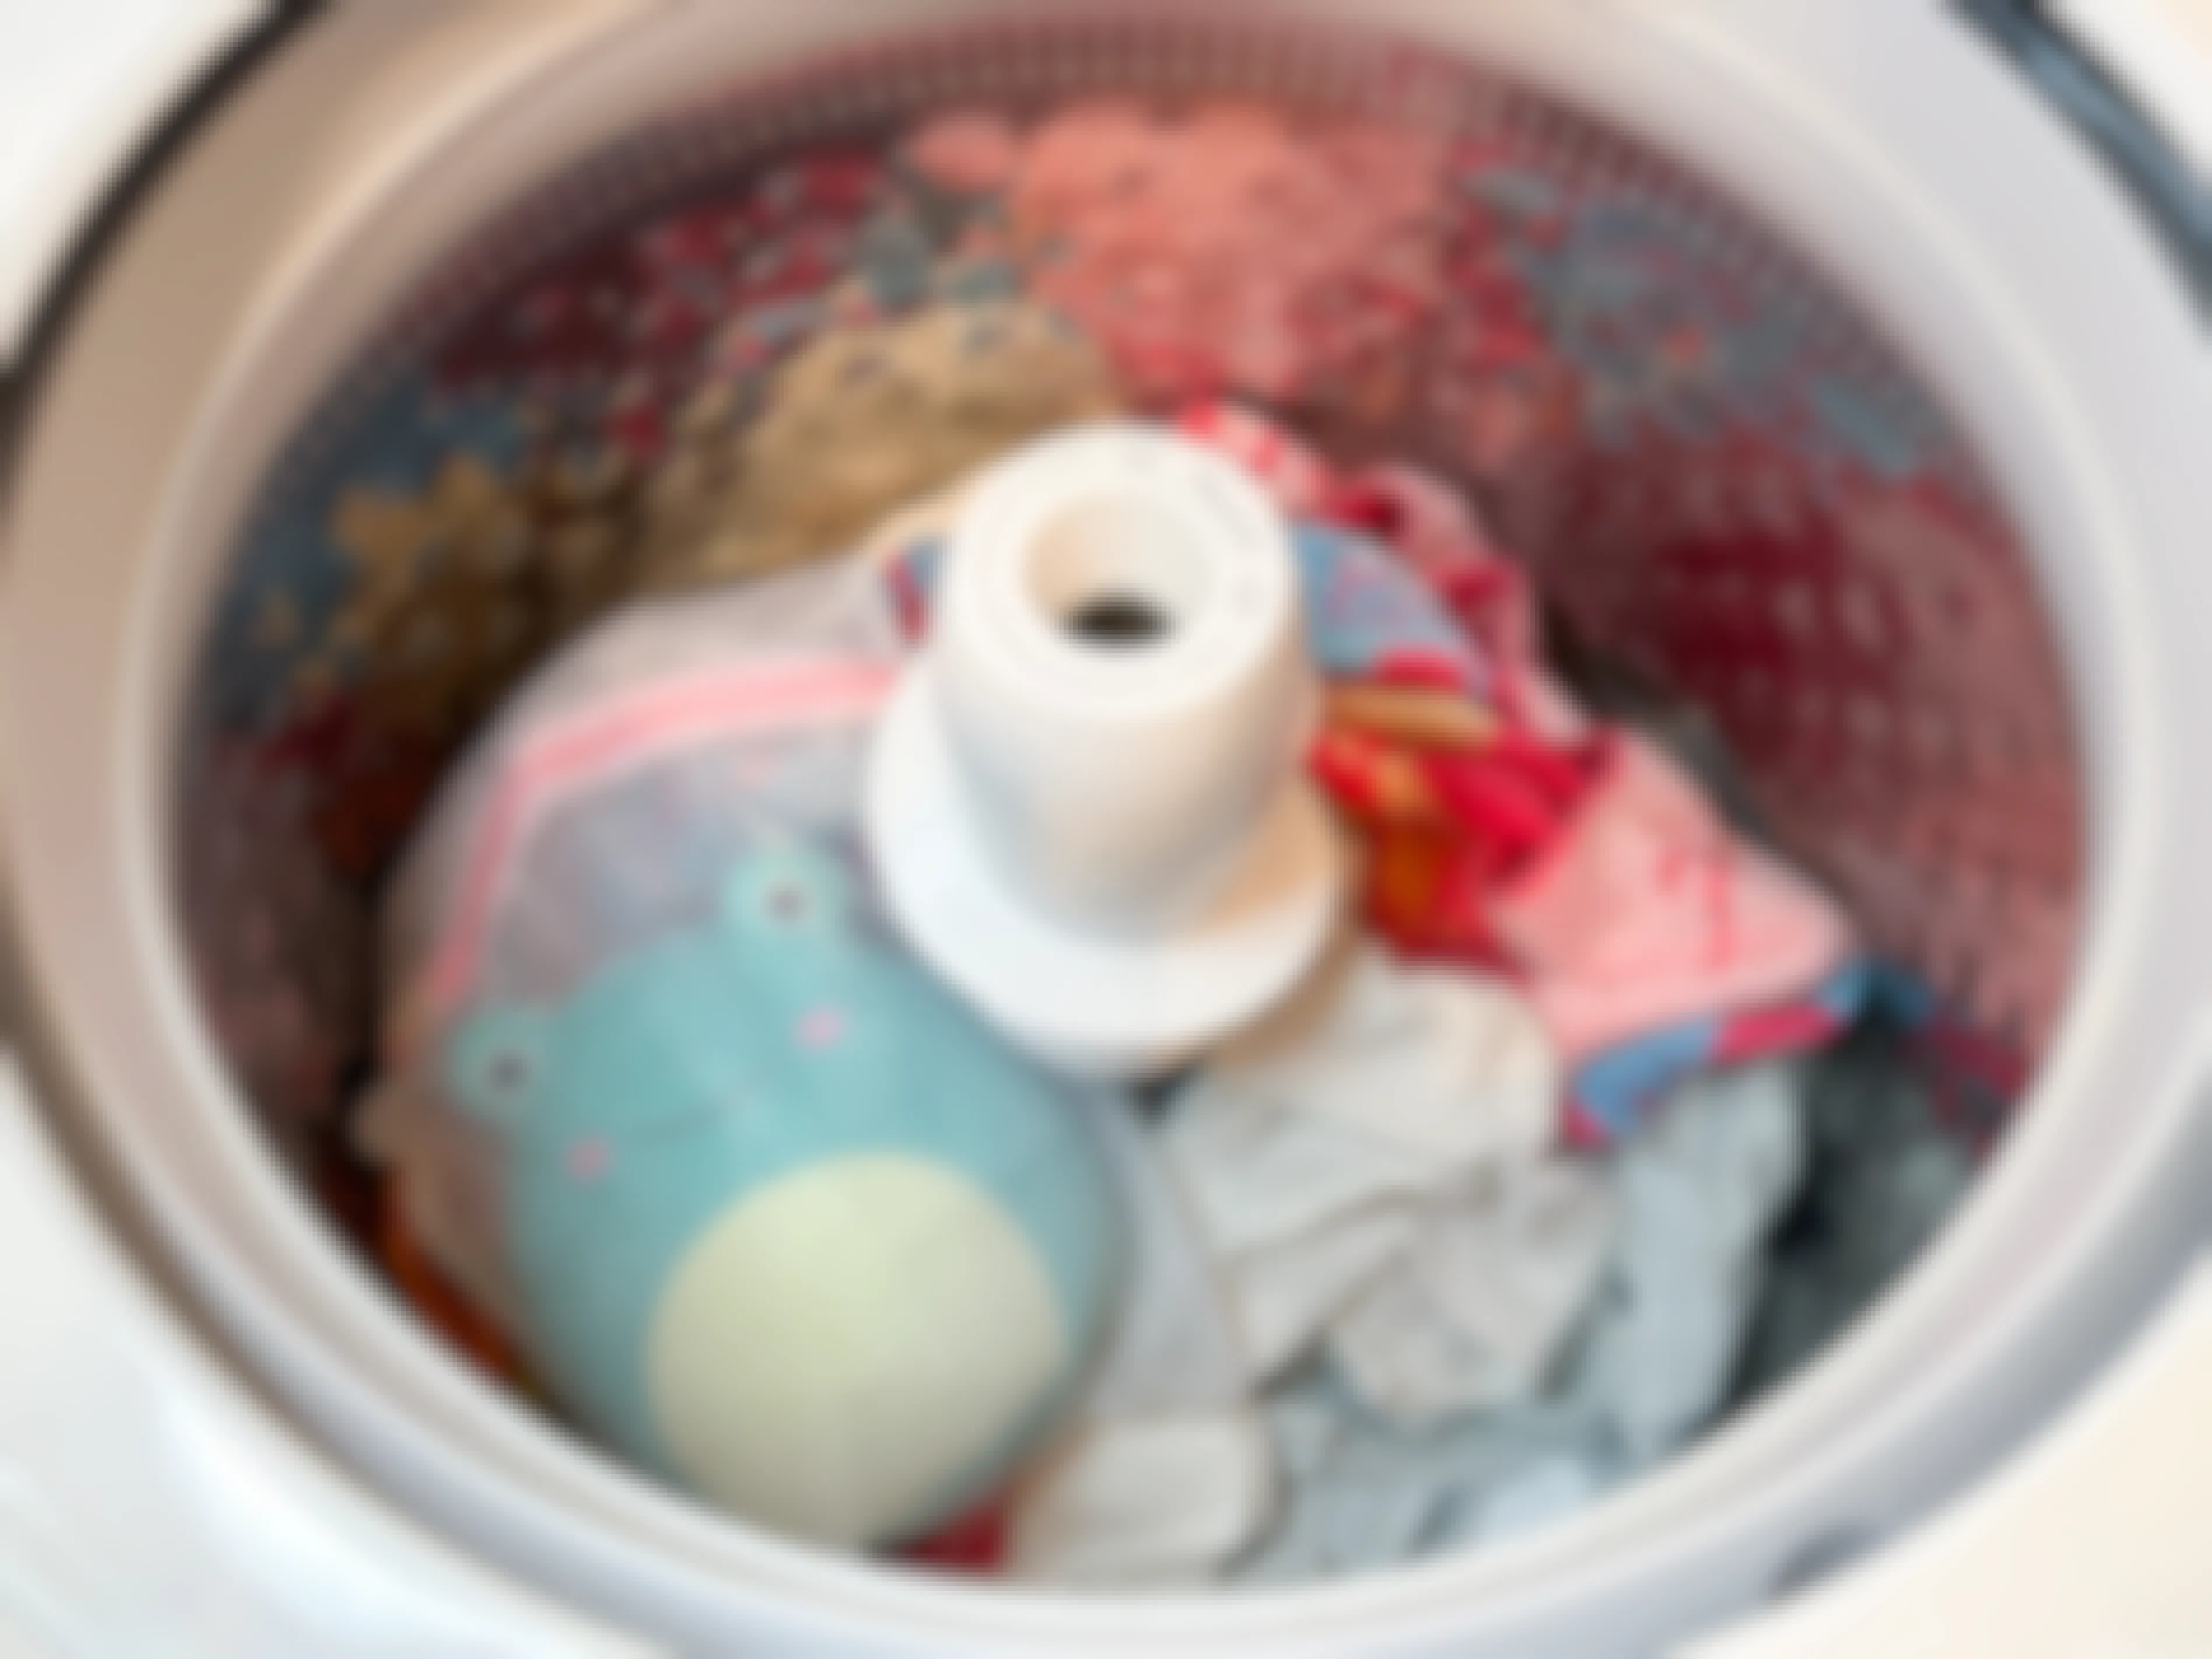 A Squishmallow in a mesh bag in a washing machine with towels